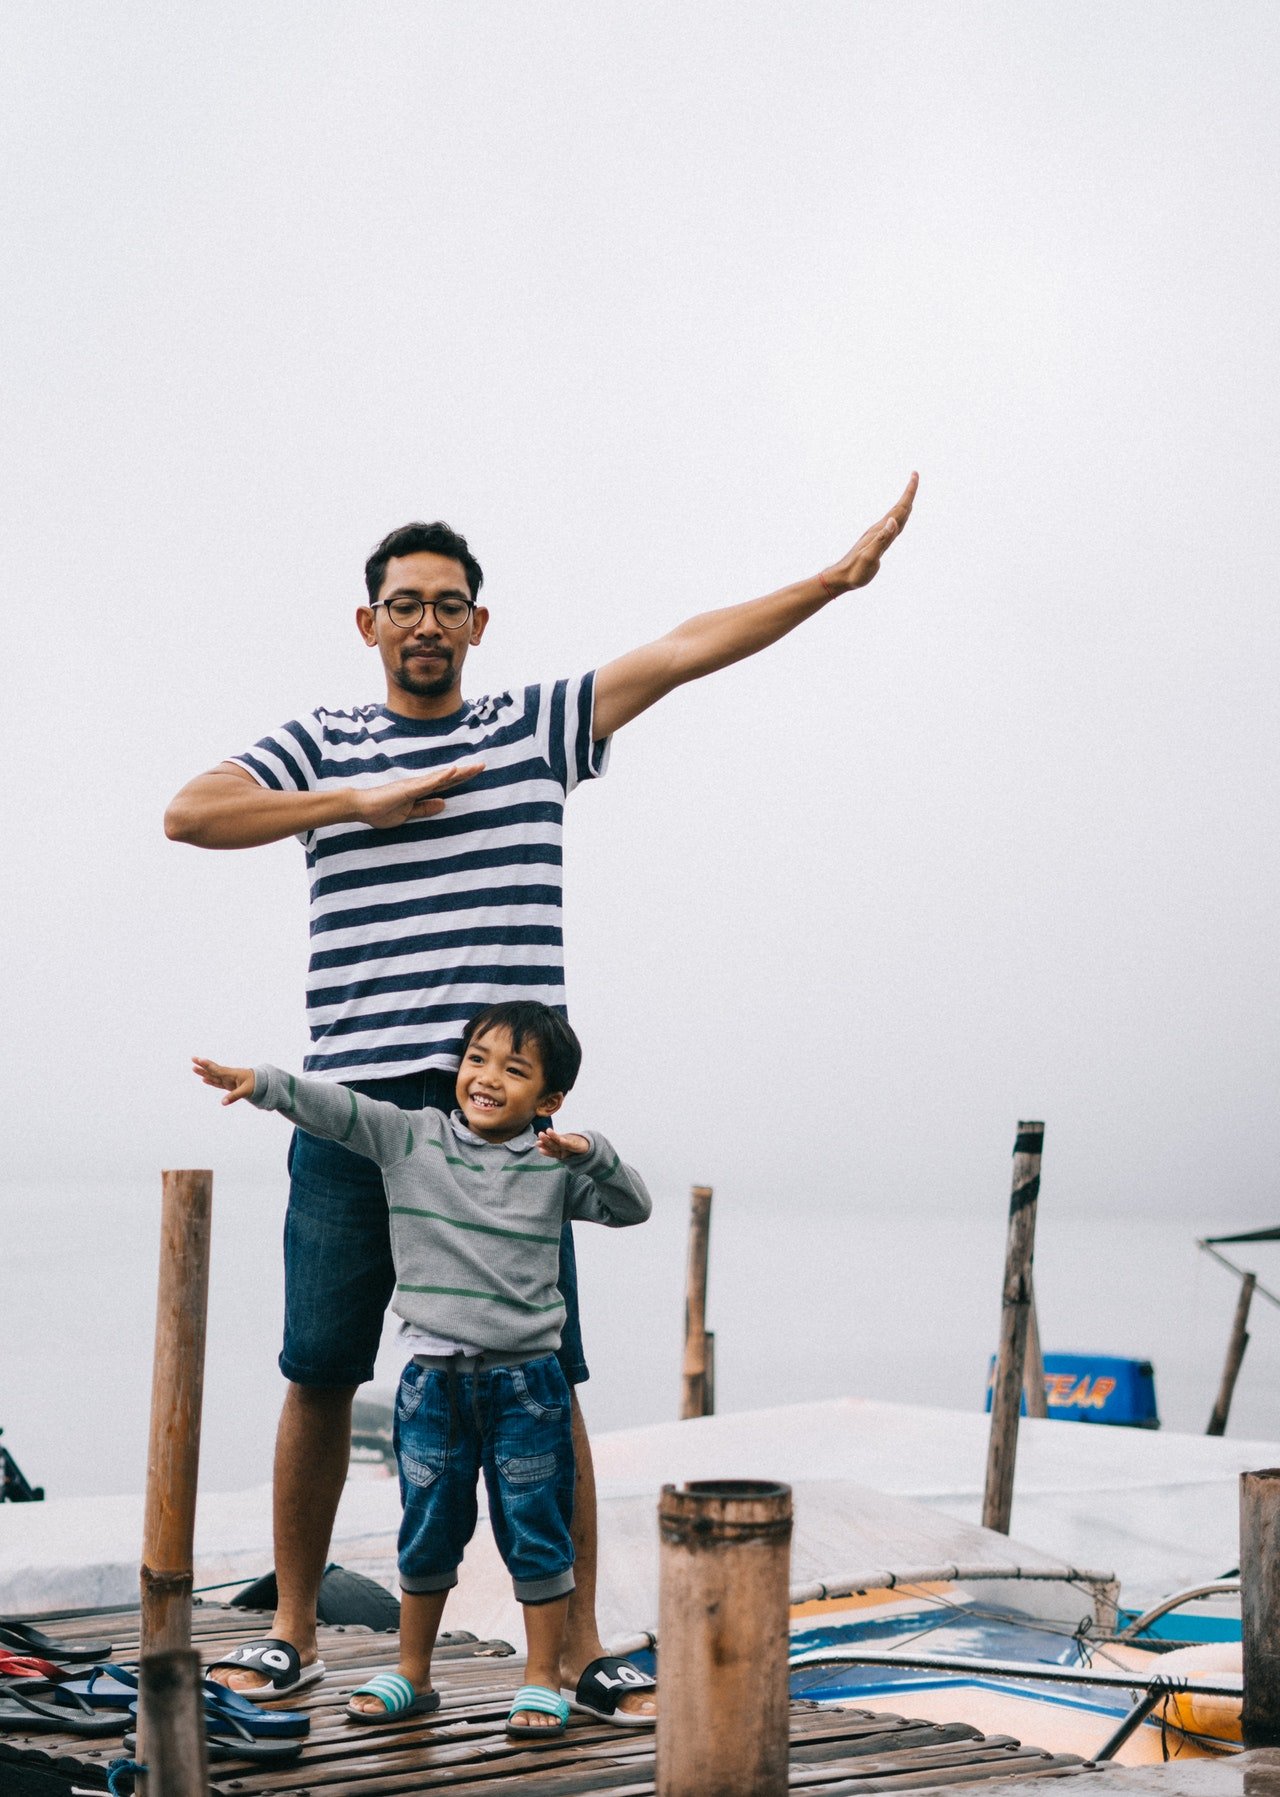 Father and son having a good time | Photo: Pexels